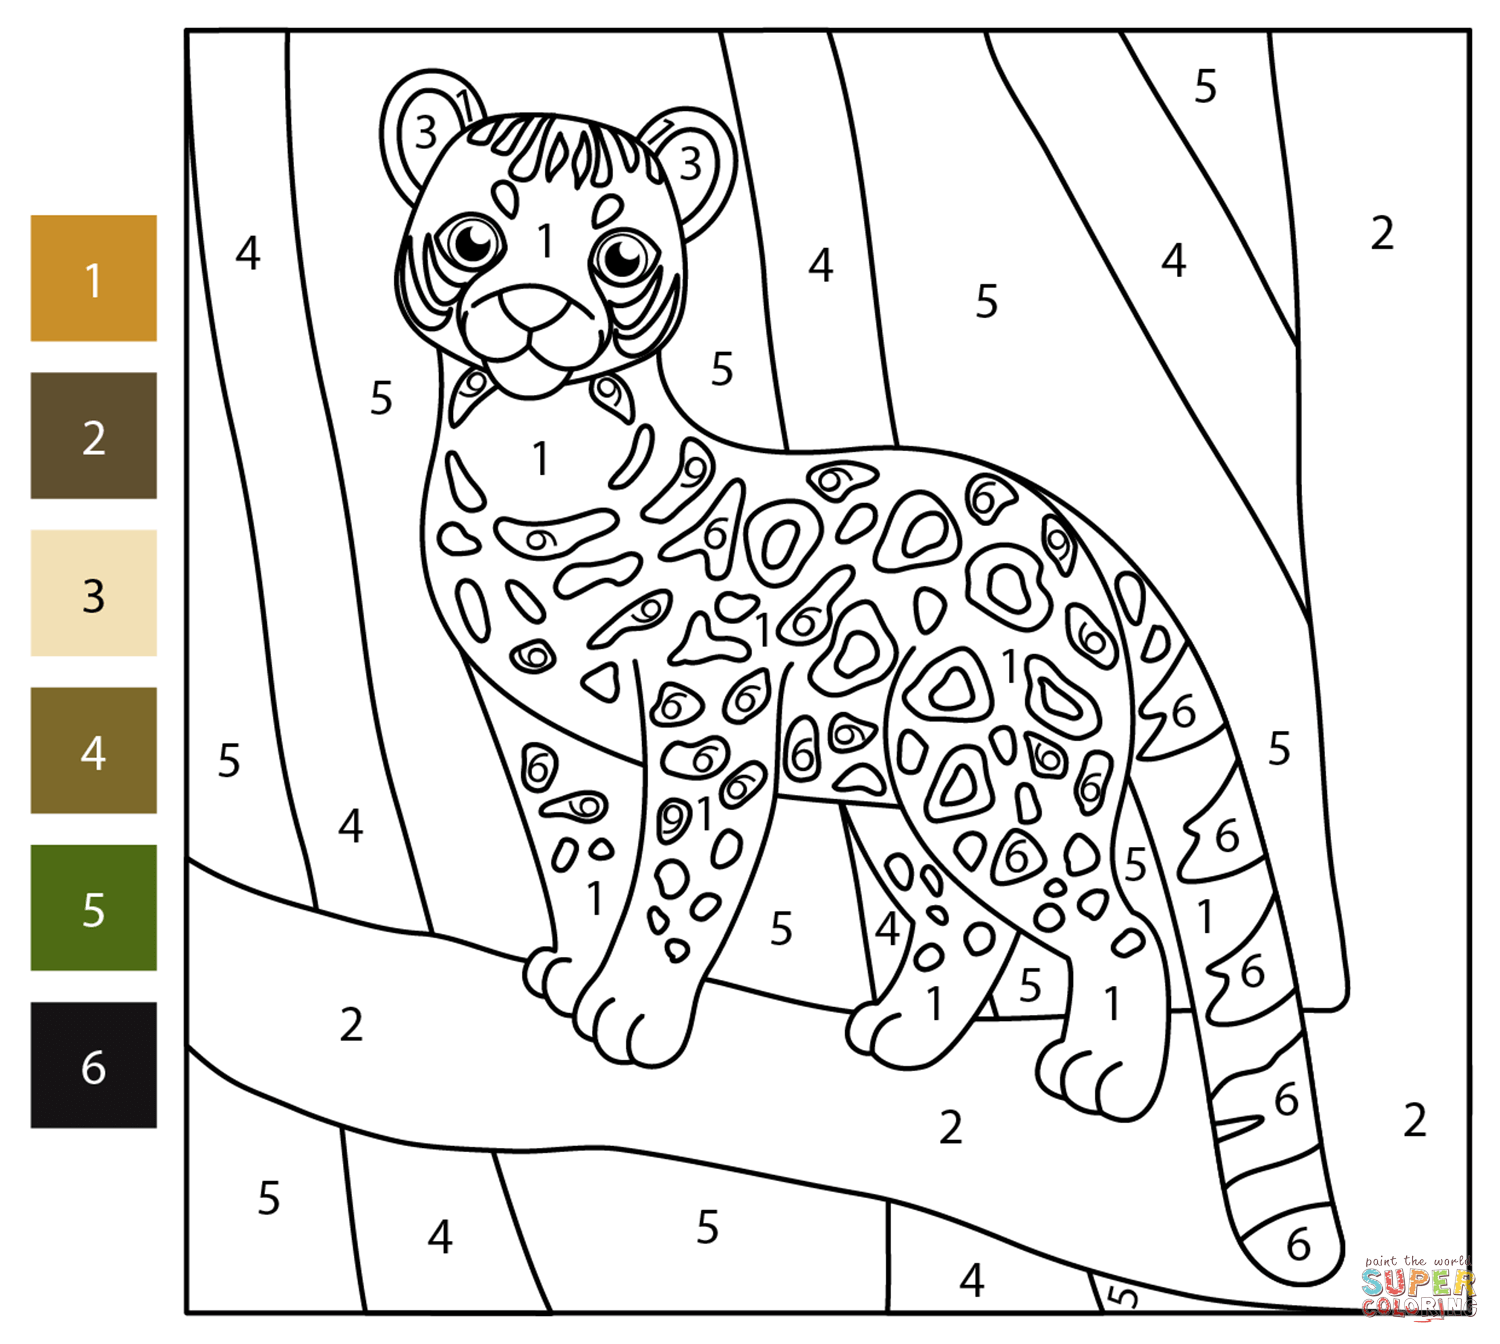 Ocelot color by number free printable coloring pages